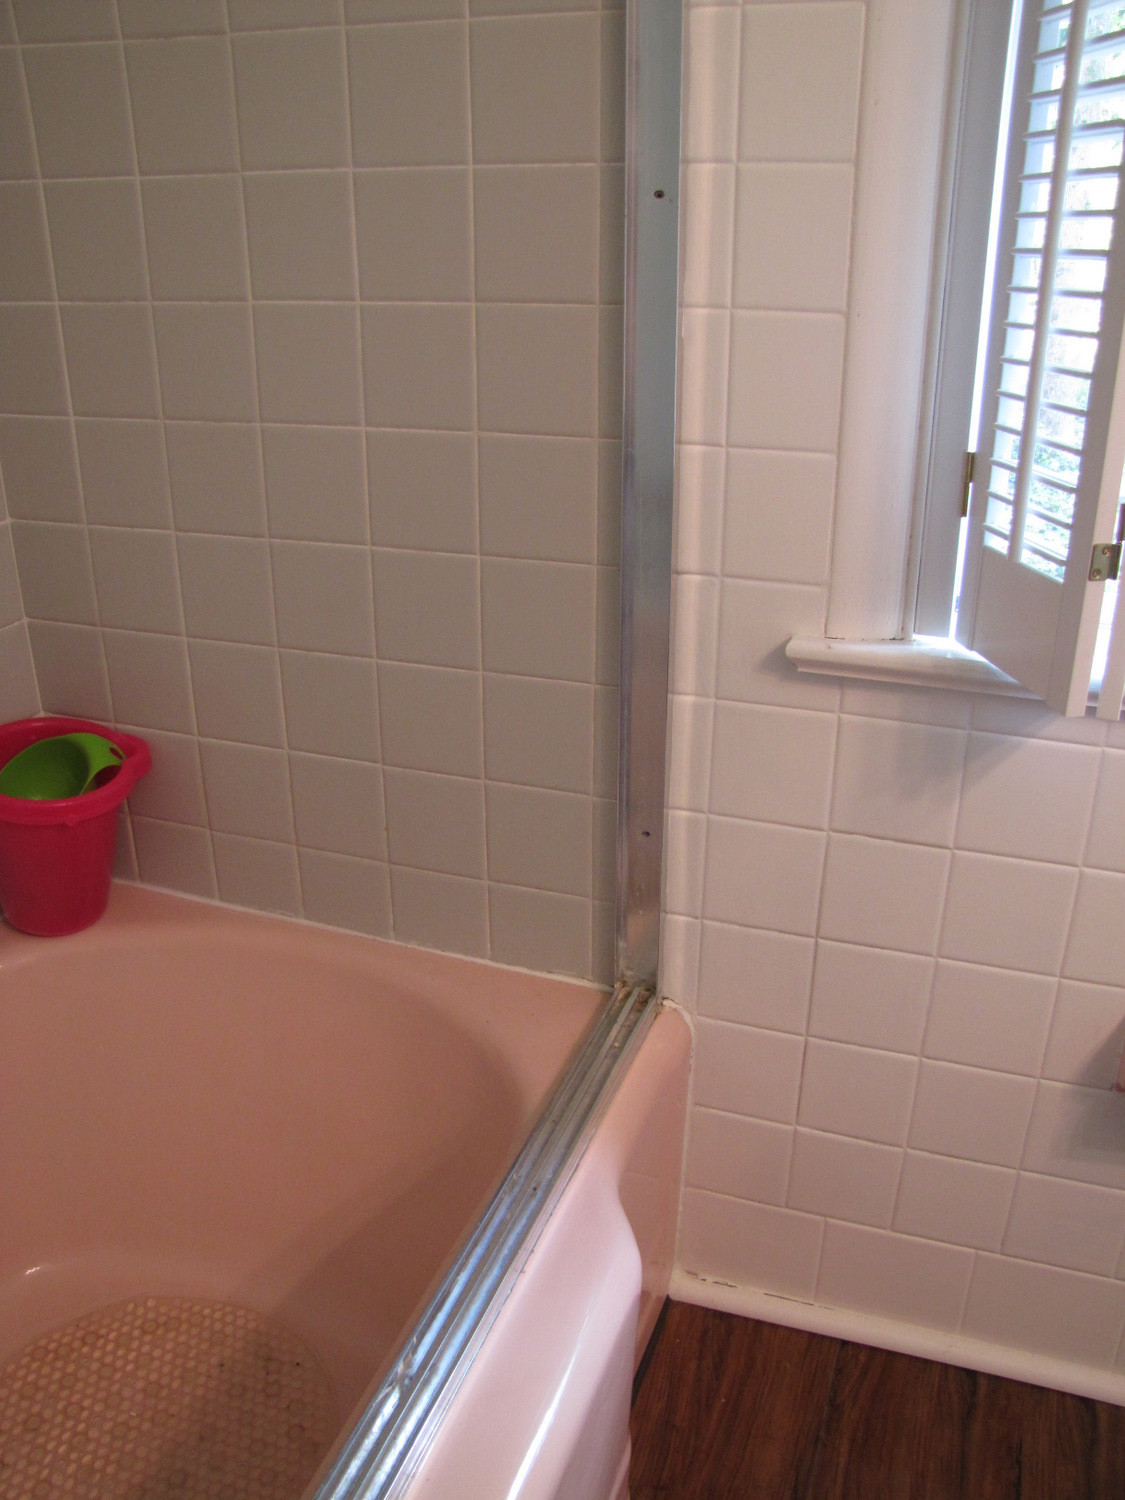 Painting Old Bathroom Tiles
 Smoke & Mirrors A Bathroom Reveal  The Painted Home